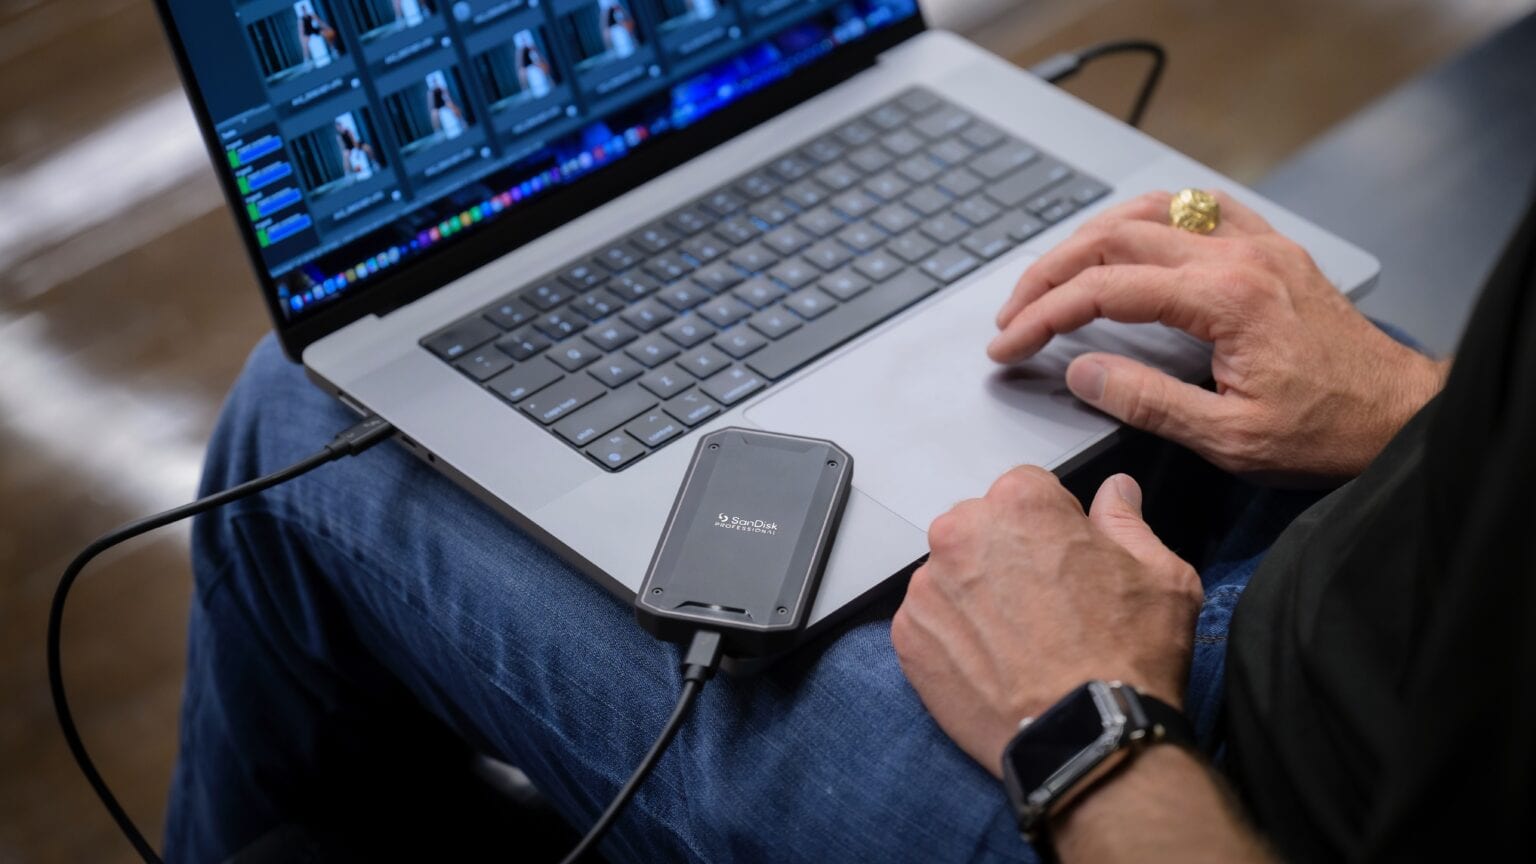 SanDisk's new ultra-rugged 2TB external SSD offers high-speed Thunderbolt connection